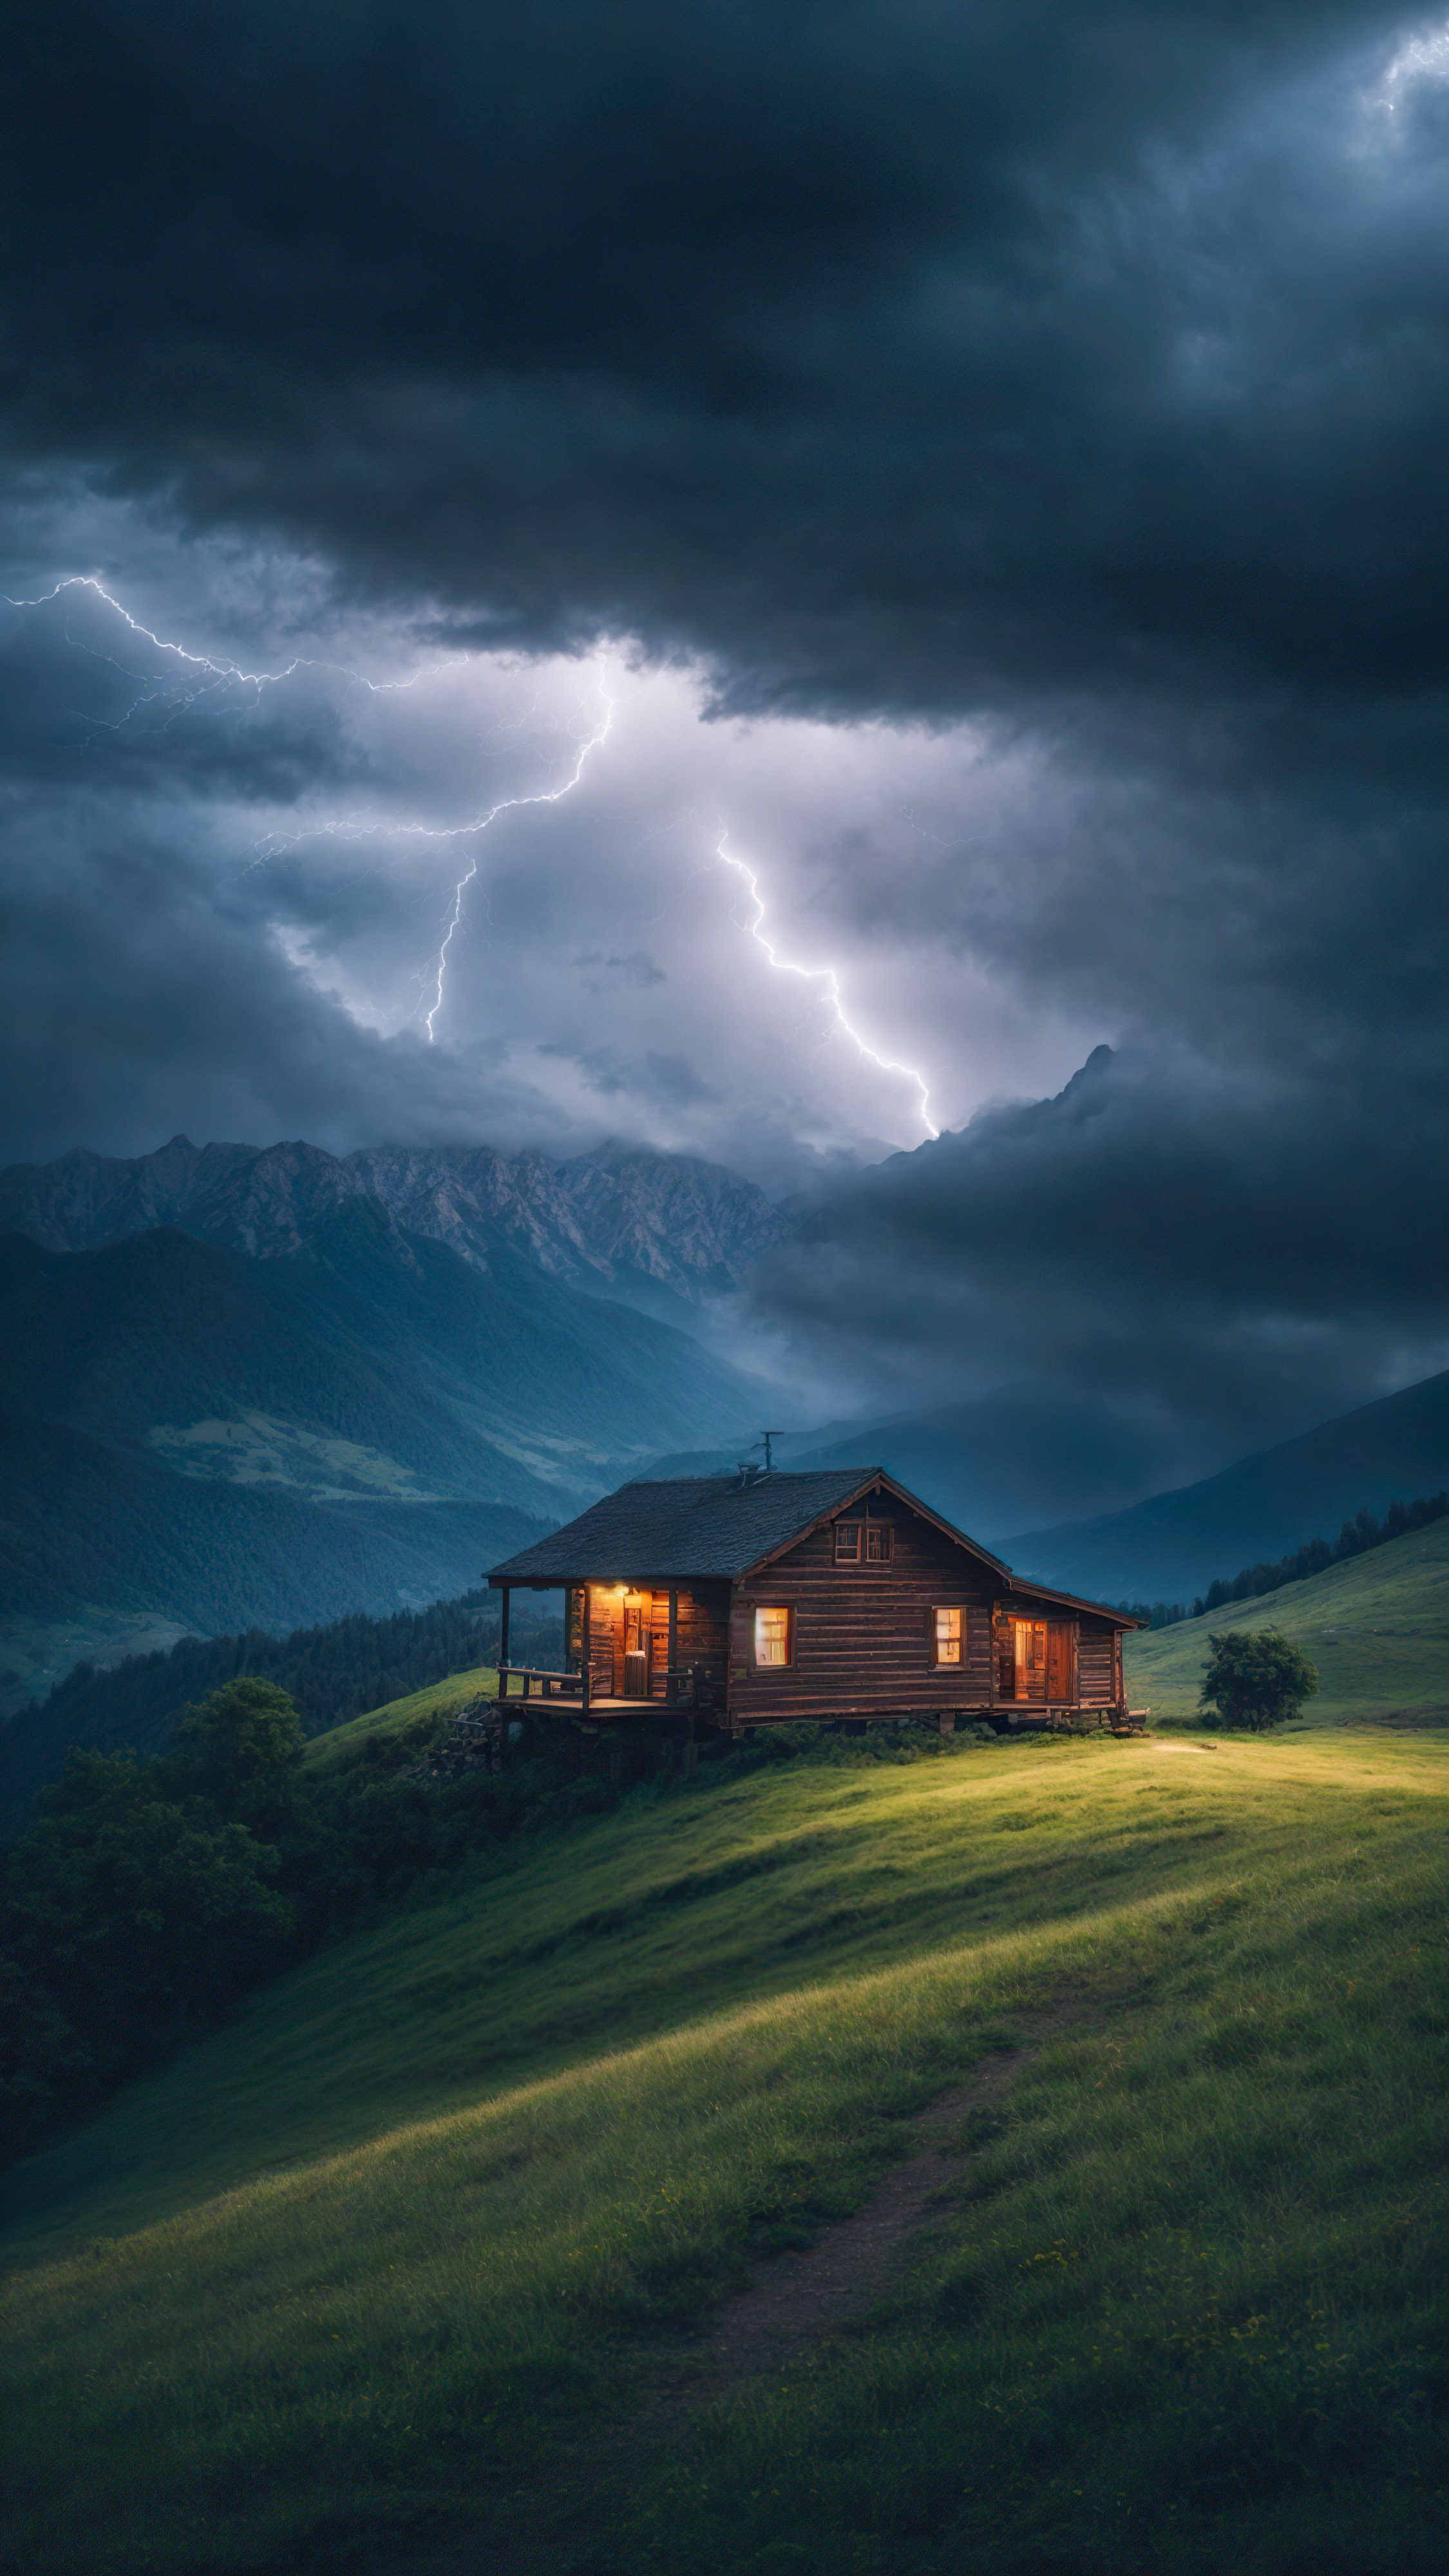 Experience the drama of a dark and stormy sky over the mountains, with lightning and thunder and a lone cabin, with this mountain scene background.